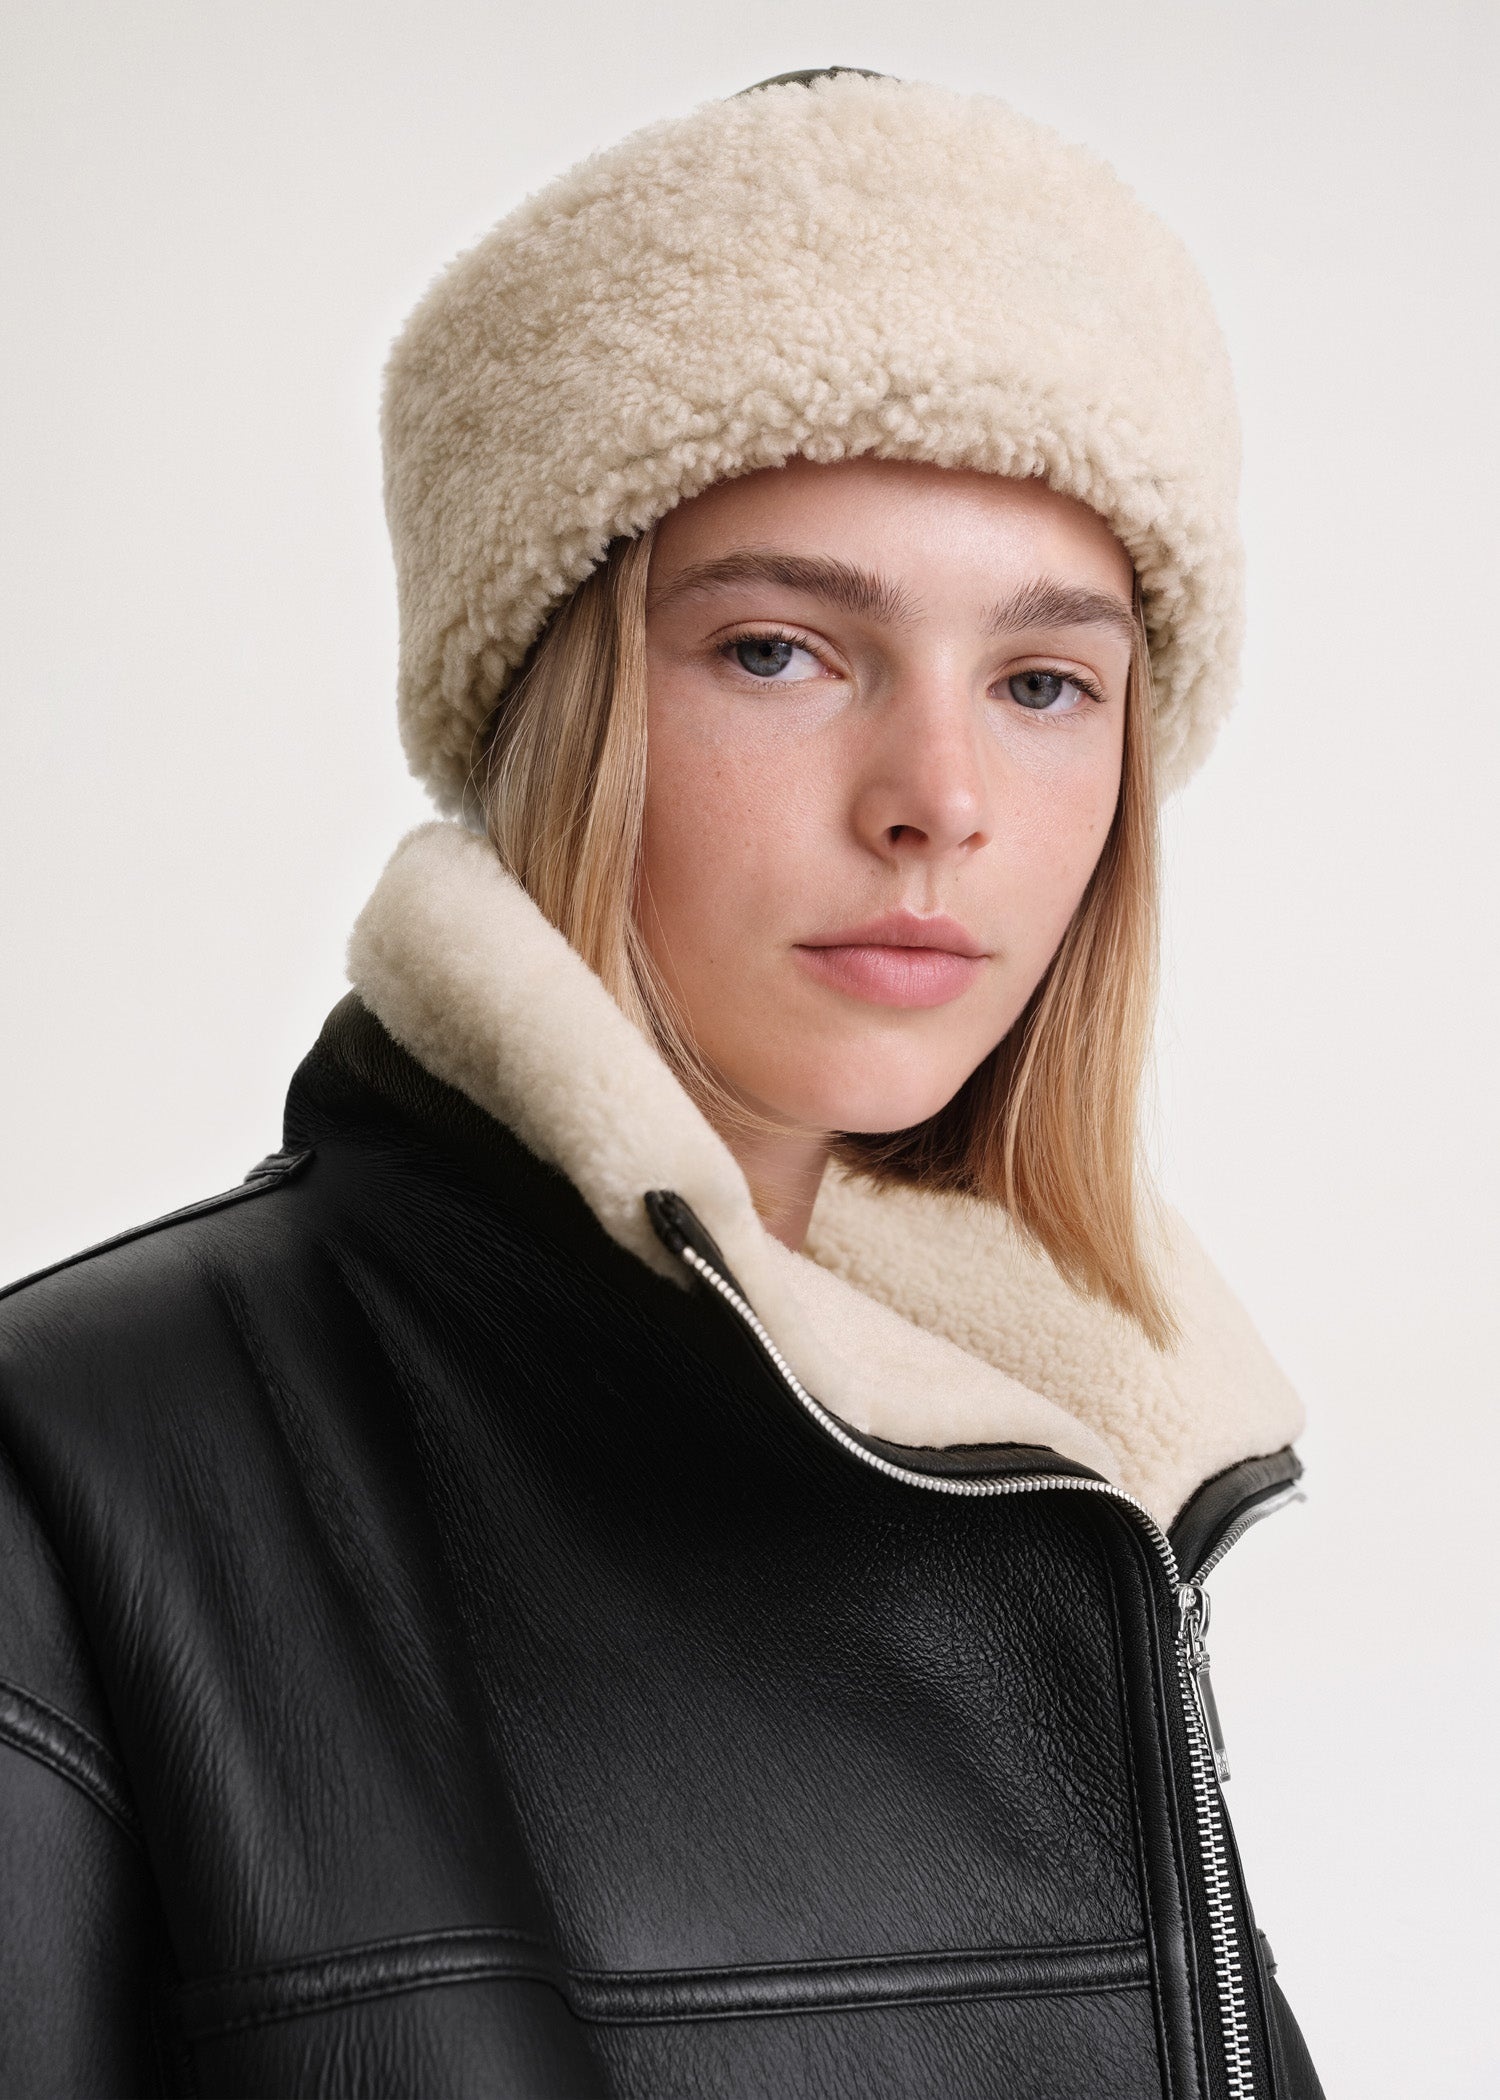 Shearling winter hat black/off white - 2